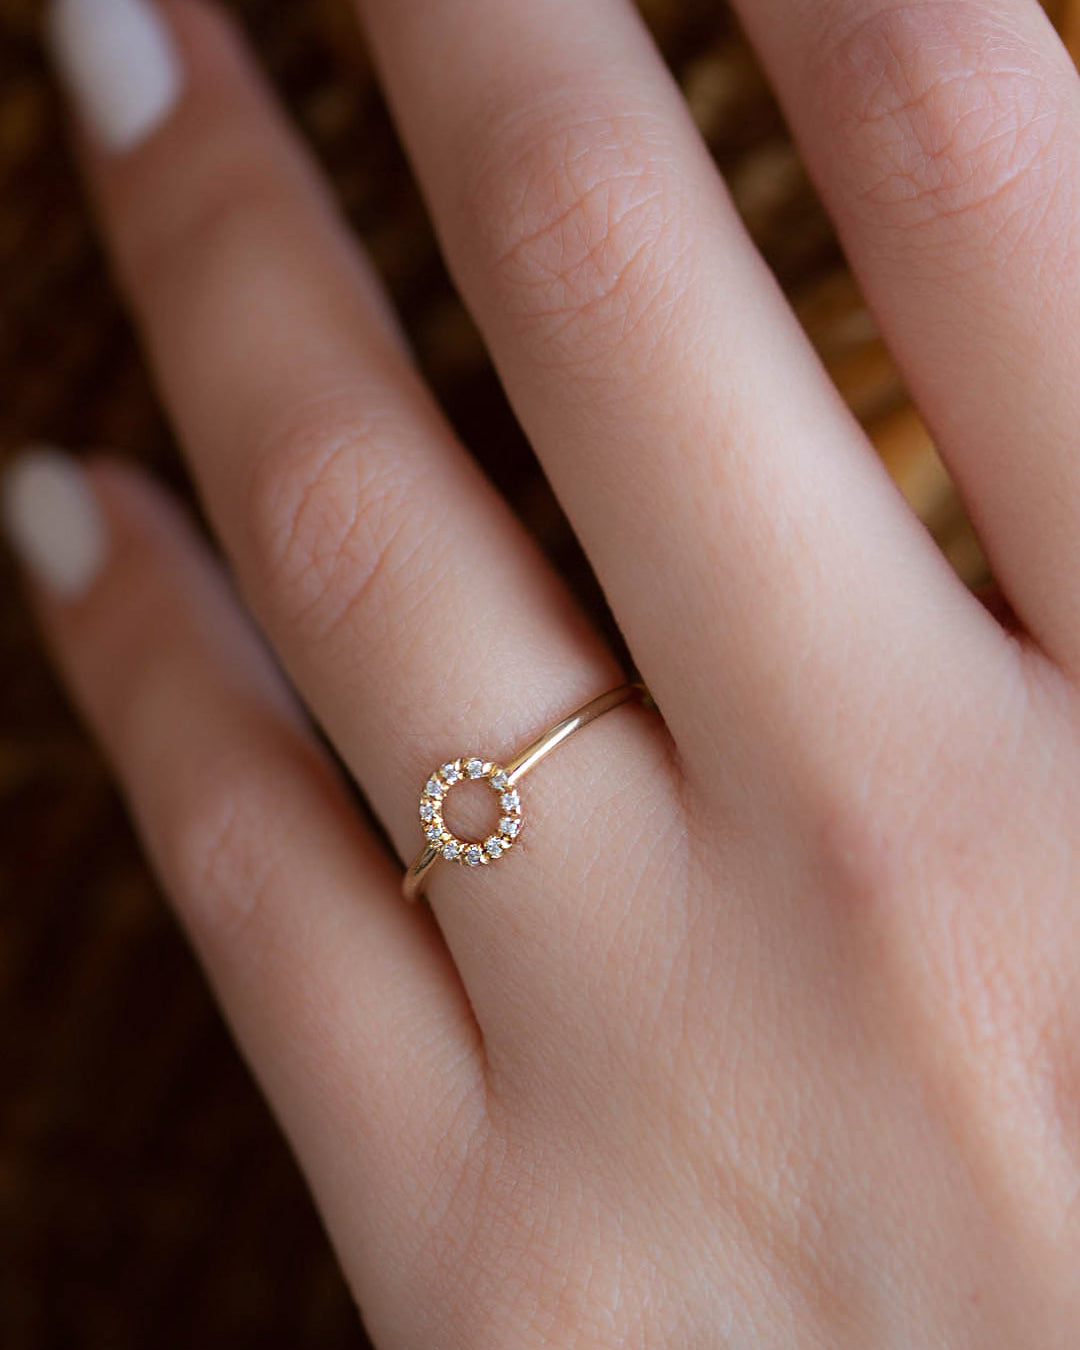 A dainty 14k yellow gold ring with a circle on top, set with brilliant cut white diamonds. 